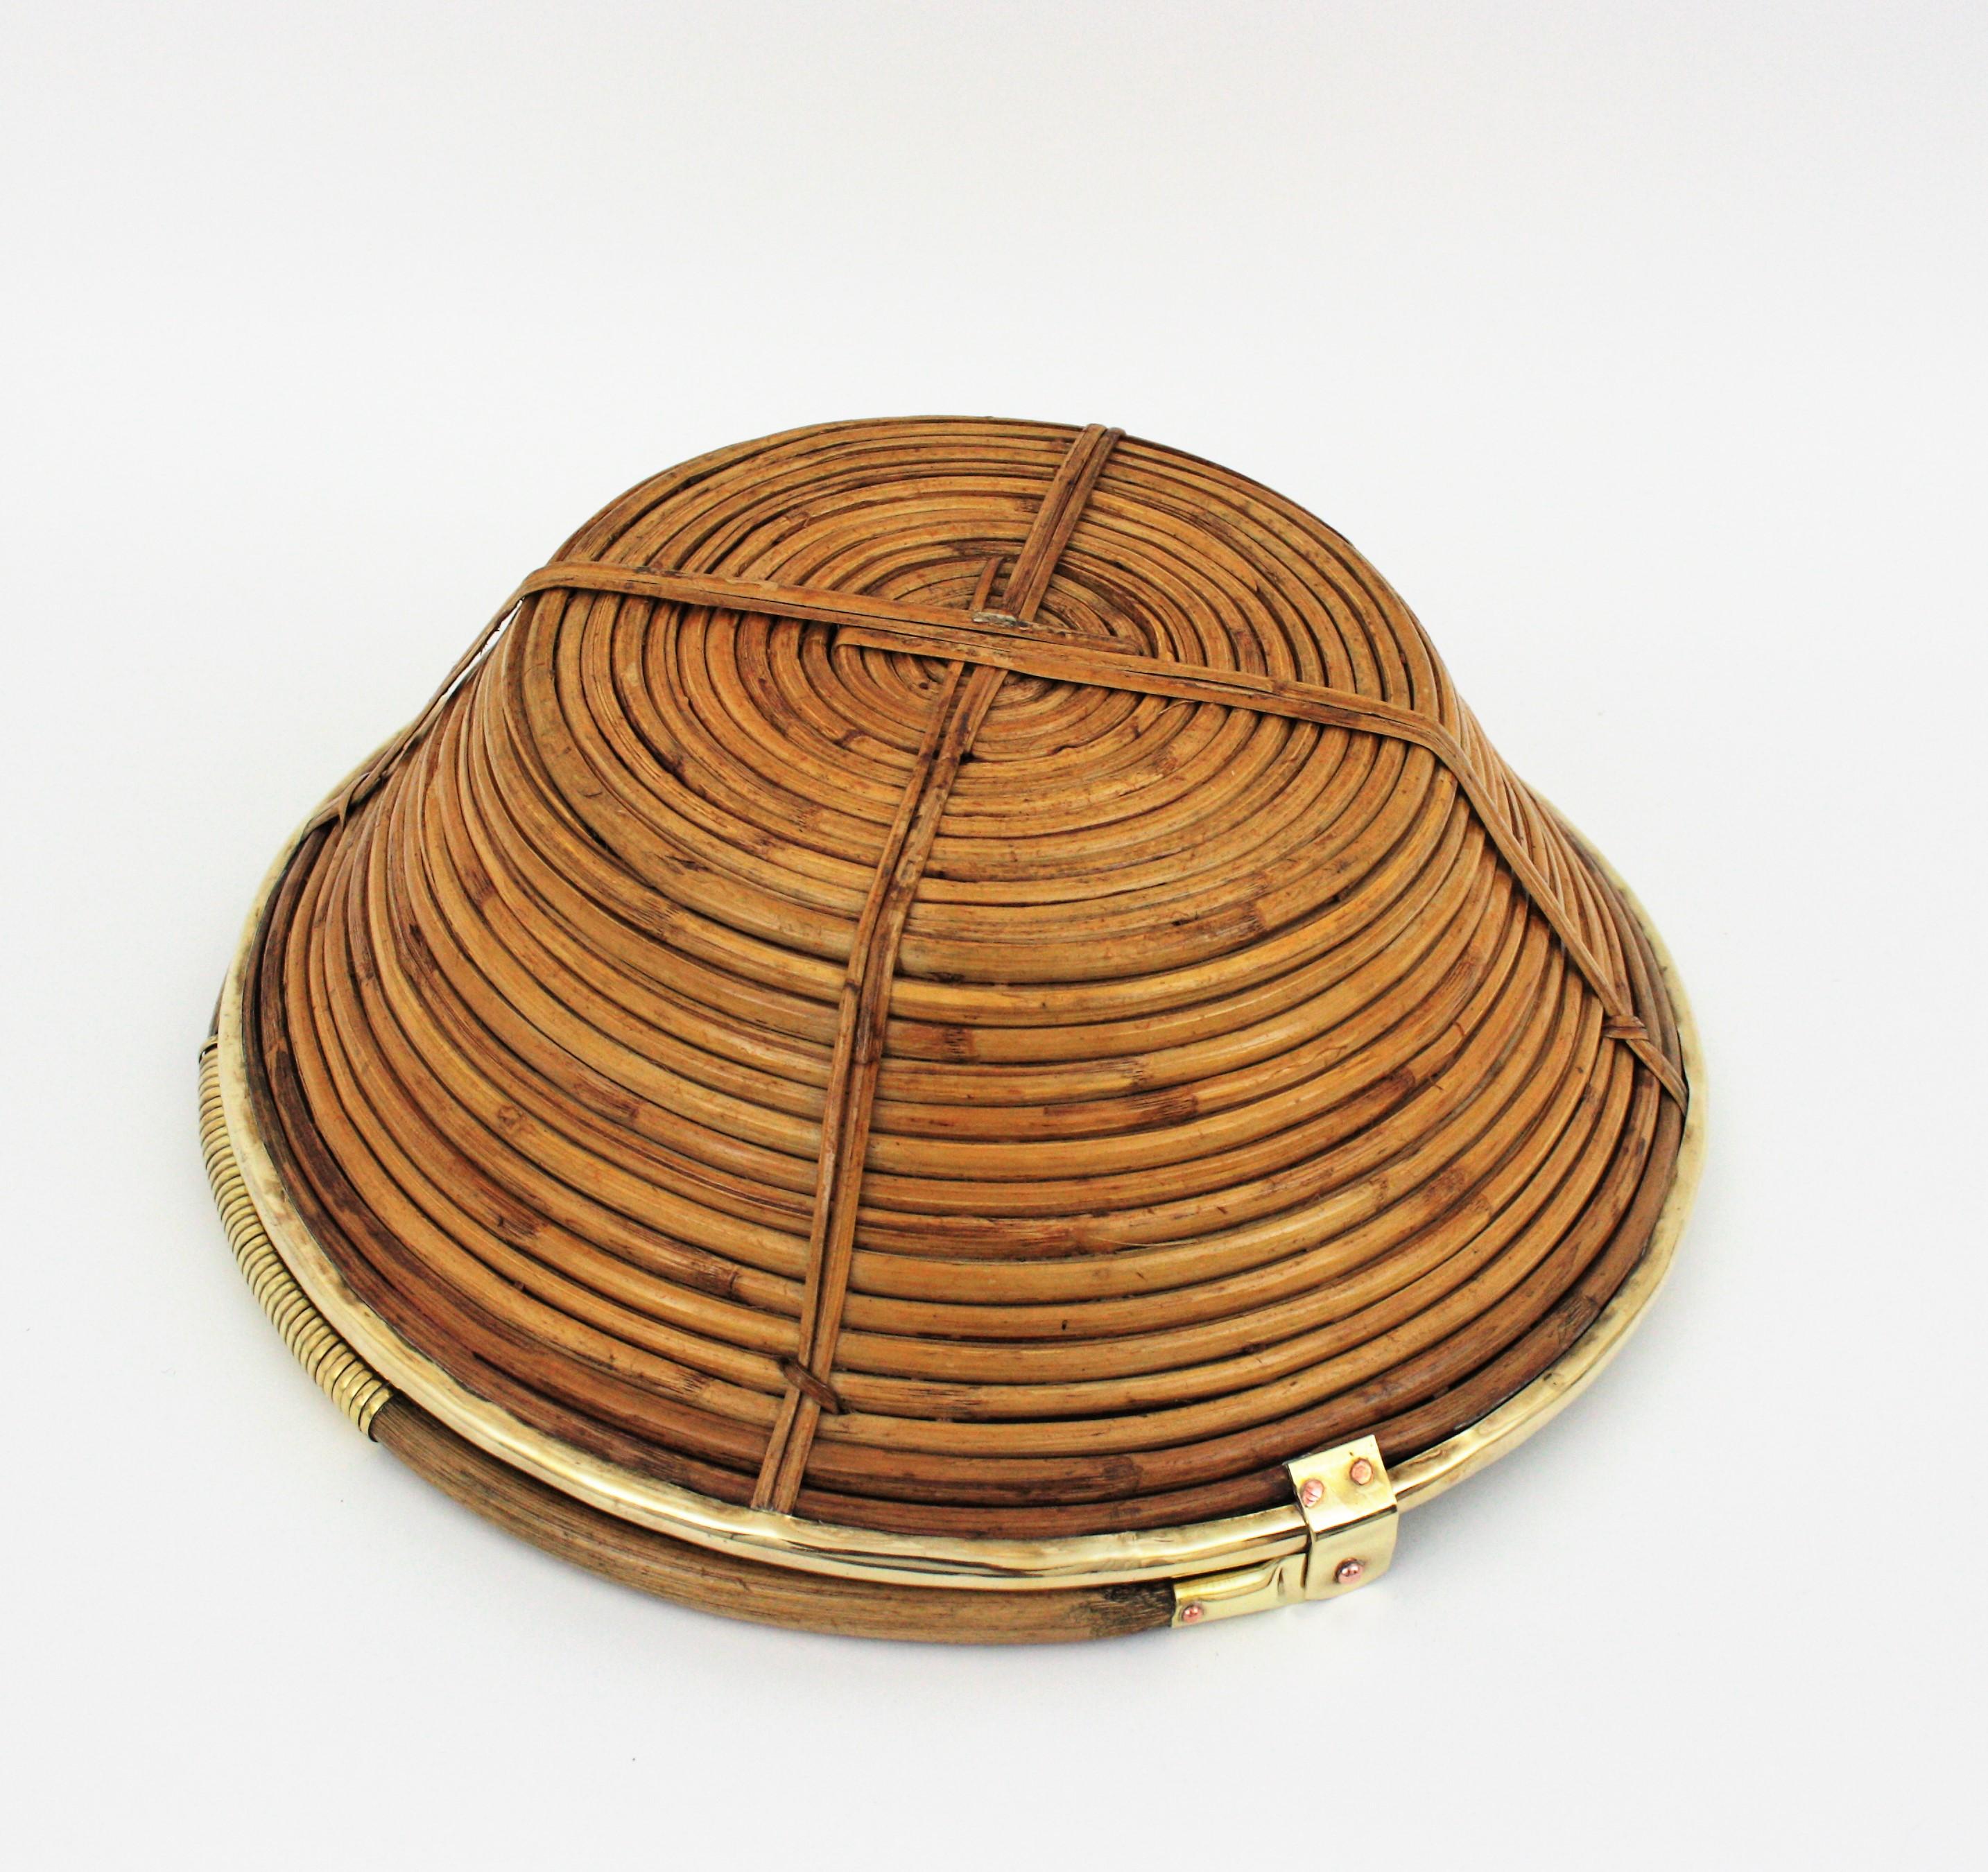 Rattan and Brass Italian Large Centerpiece Basket Bowl, 1970s For Sale 9